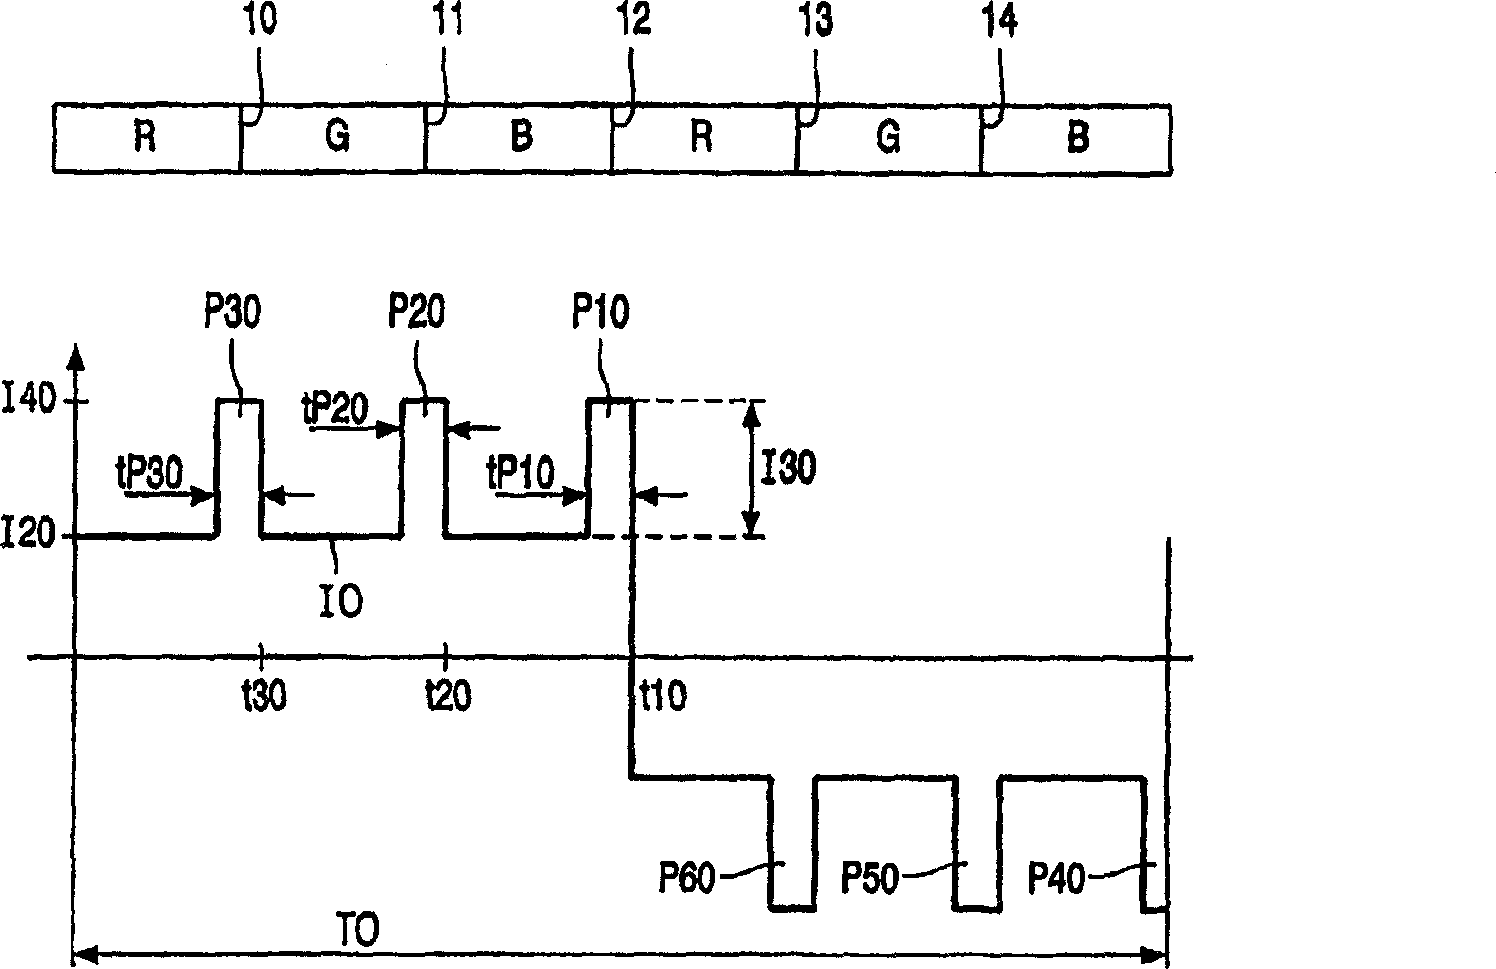 Method of representing a video image by means of a projector